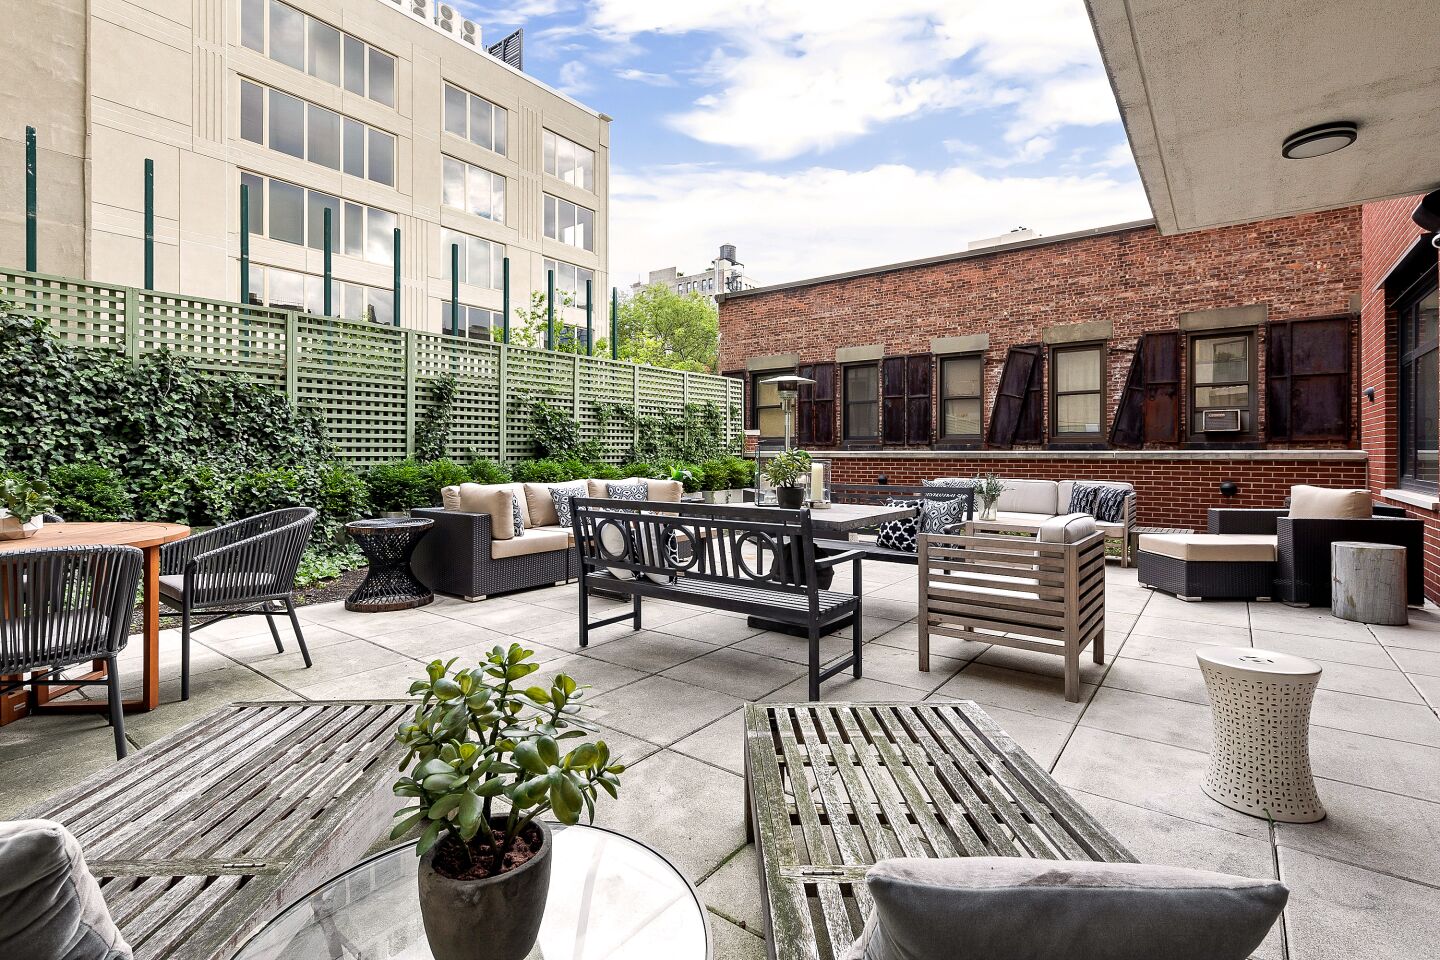 The three-bedroom condo listed by Joe Jonas and Sophie Turner includes an outdoor terrace and spans an entire floor in a boutique building in Lower Manhattan.